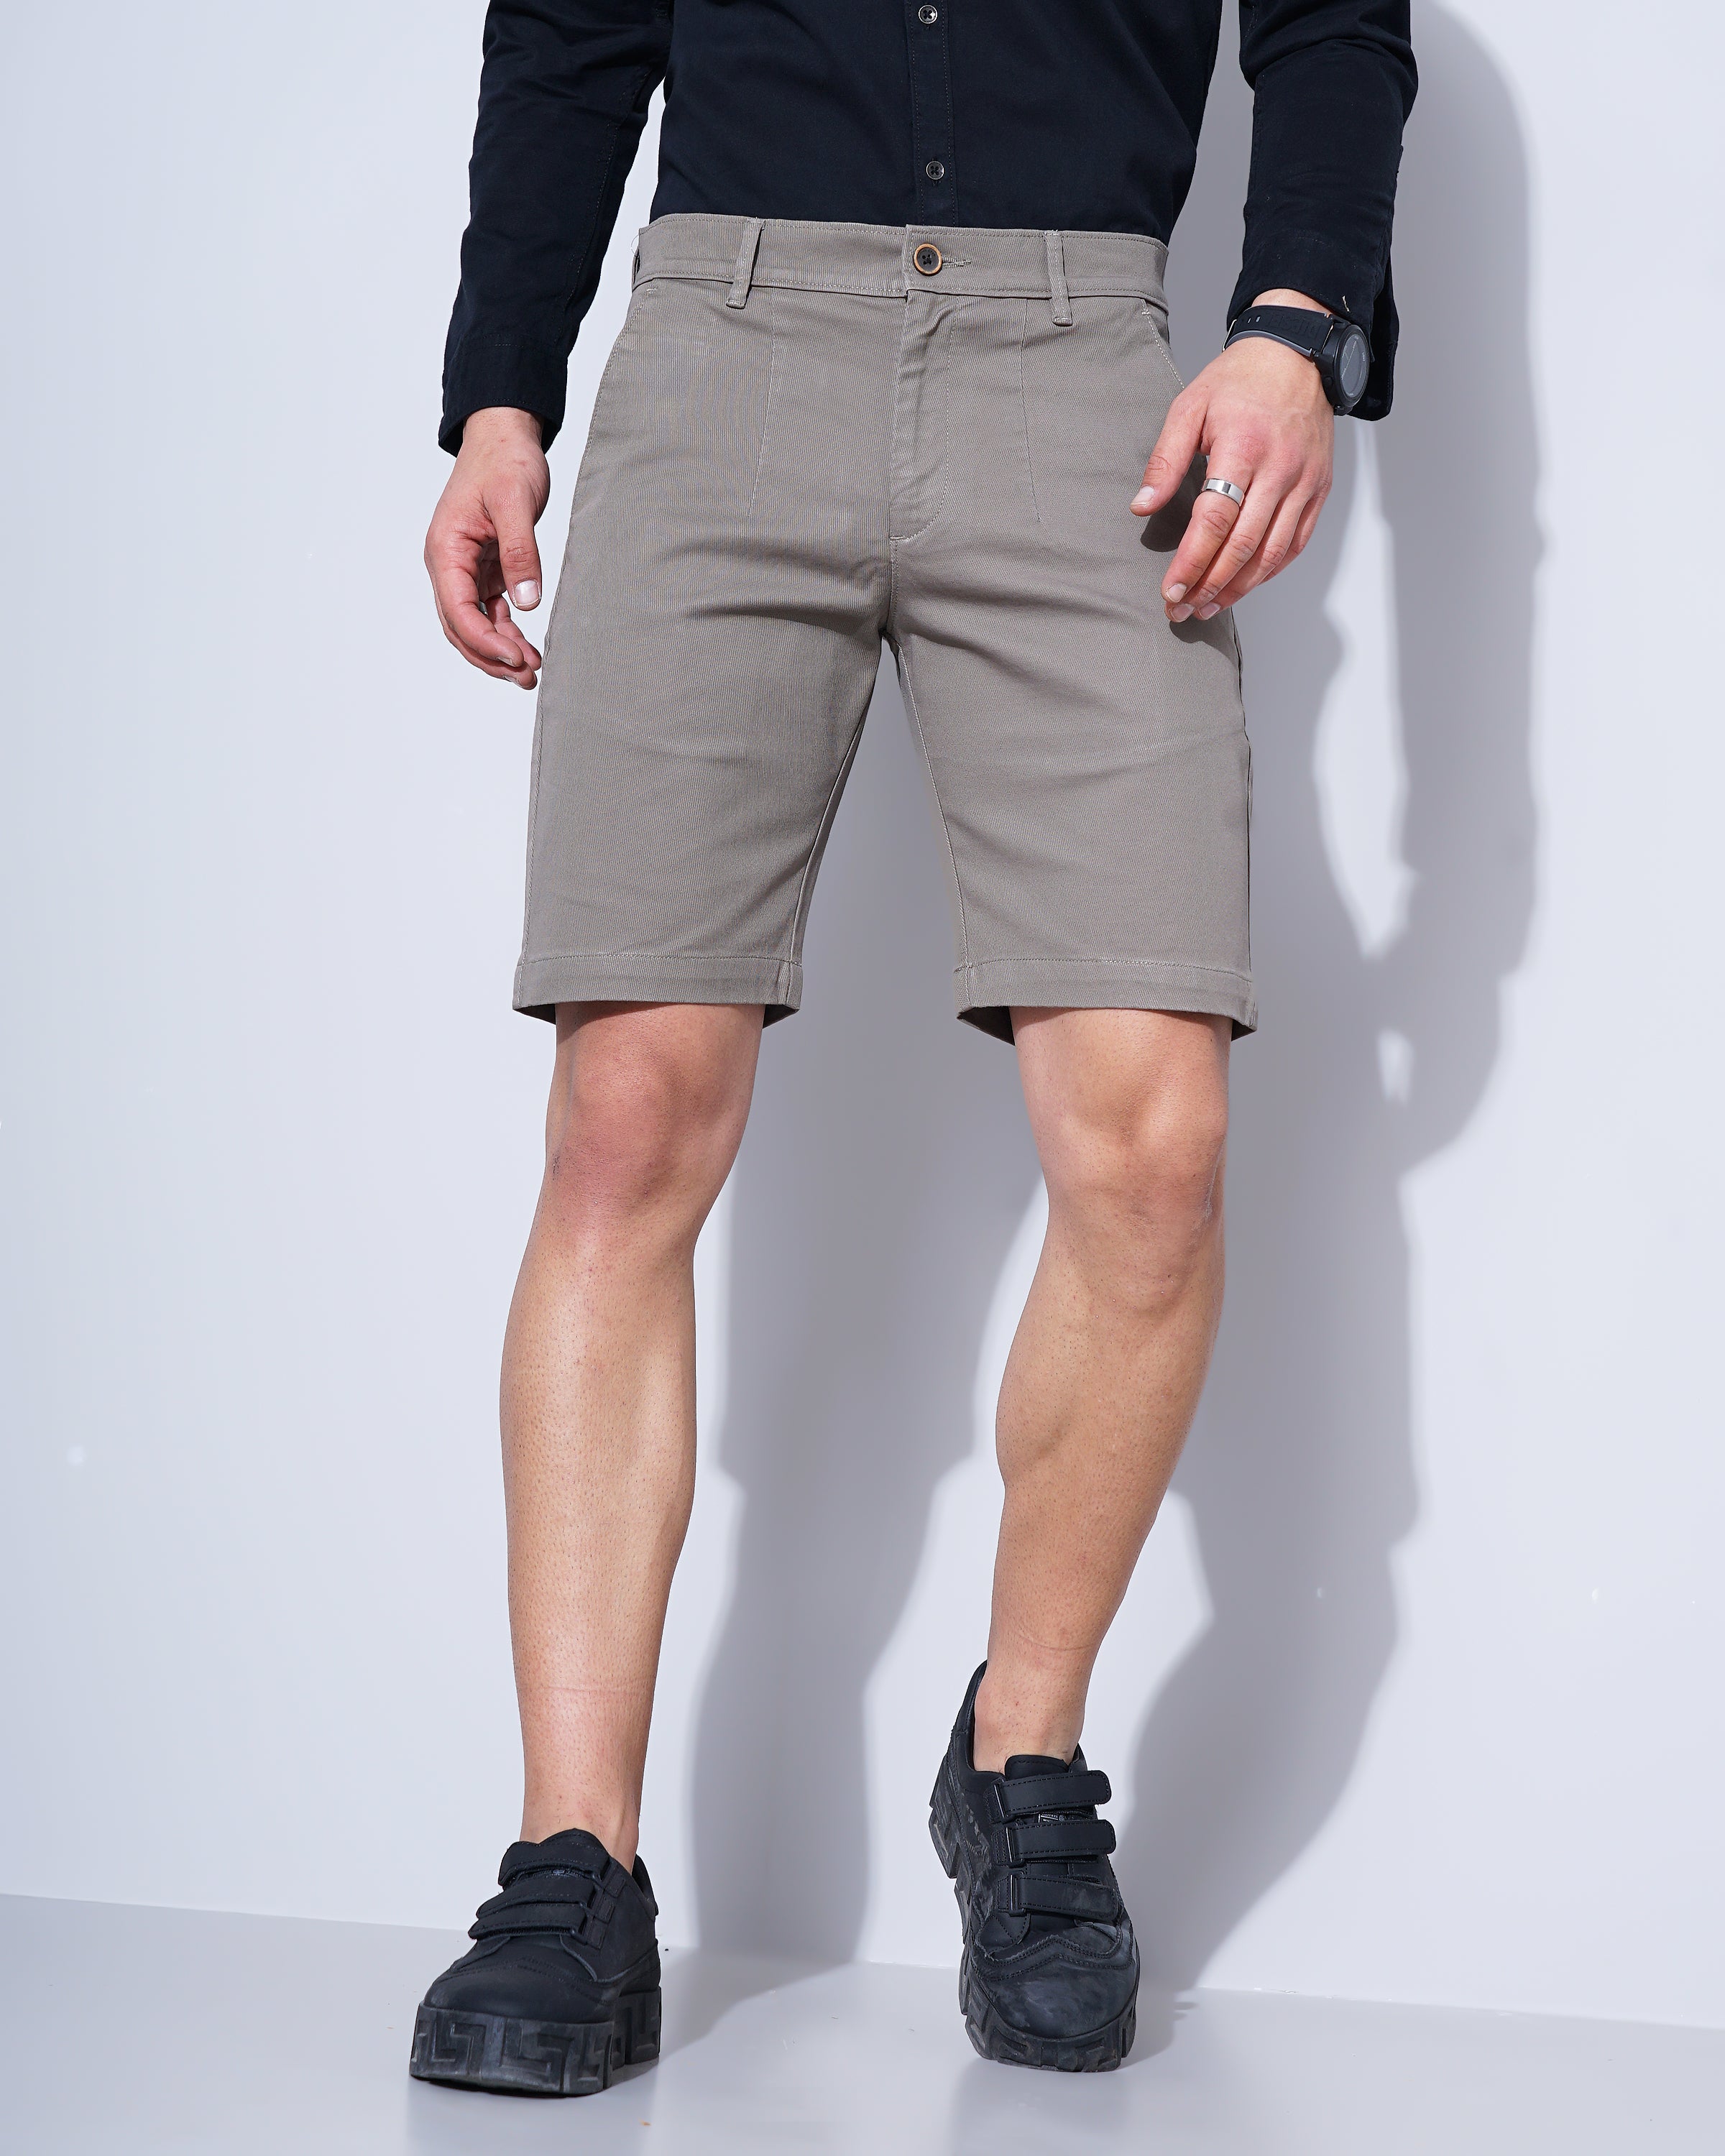 SELF DESIGN CITY SHORTS WITH INSERT POCKETS